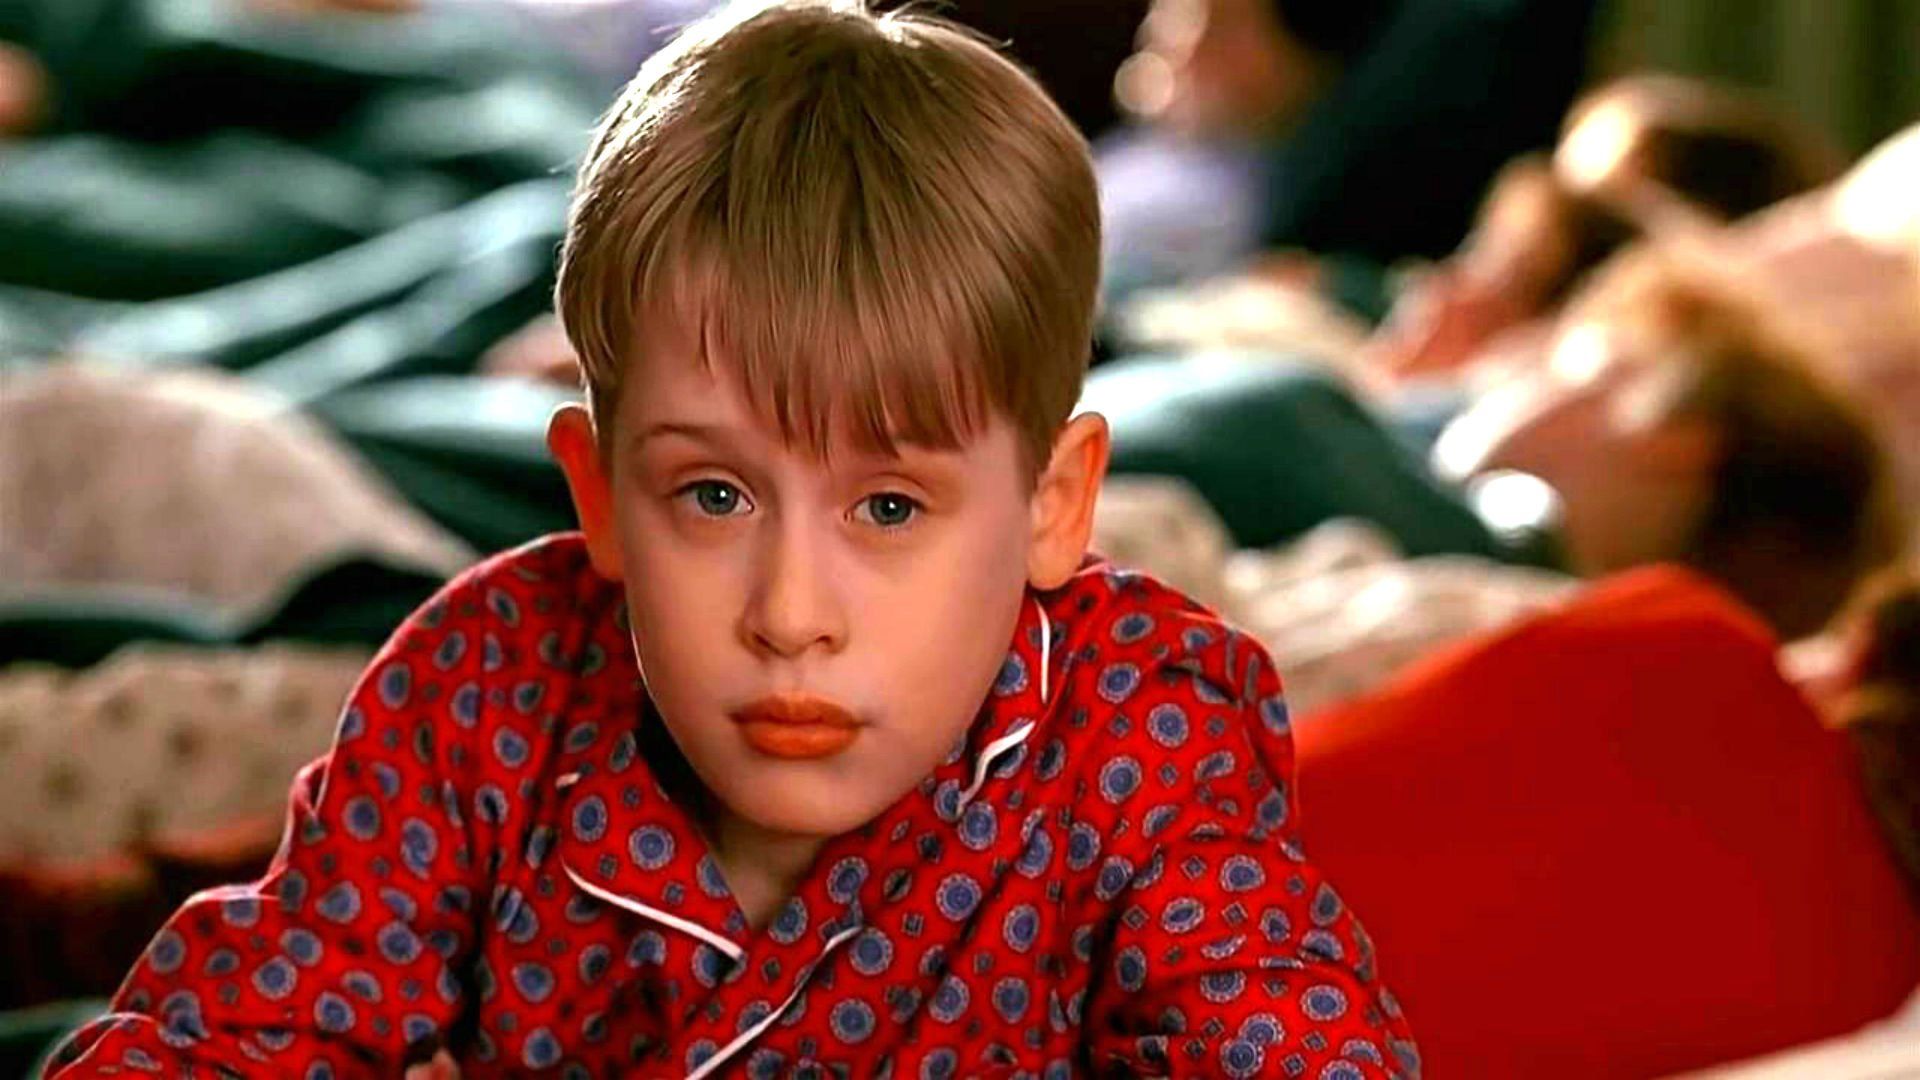 Home Alone 3 Wallpaper. Alone Wallpaper, Home Alone Christmas Background and Alone Boy Wallpaper